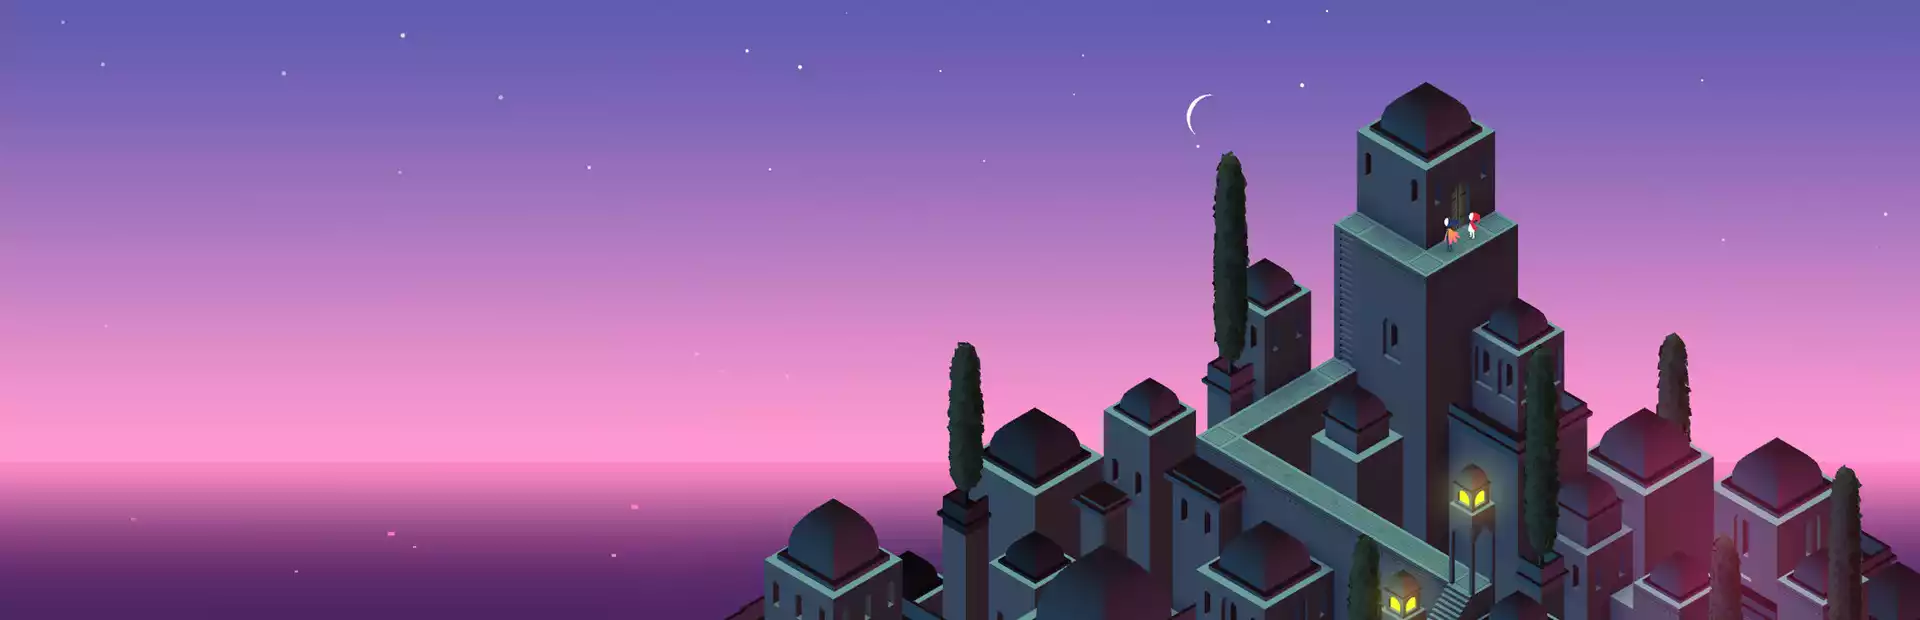 Monument Valley 2: Panoramic Edition Steam Key China